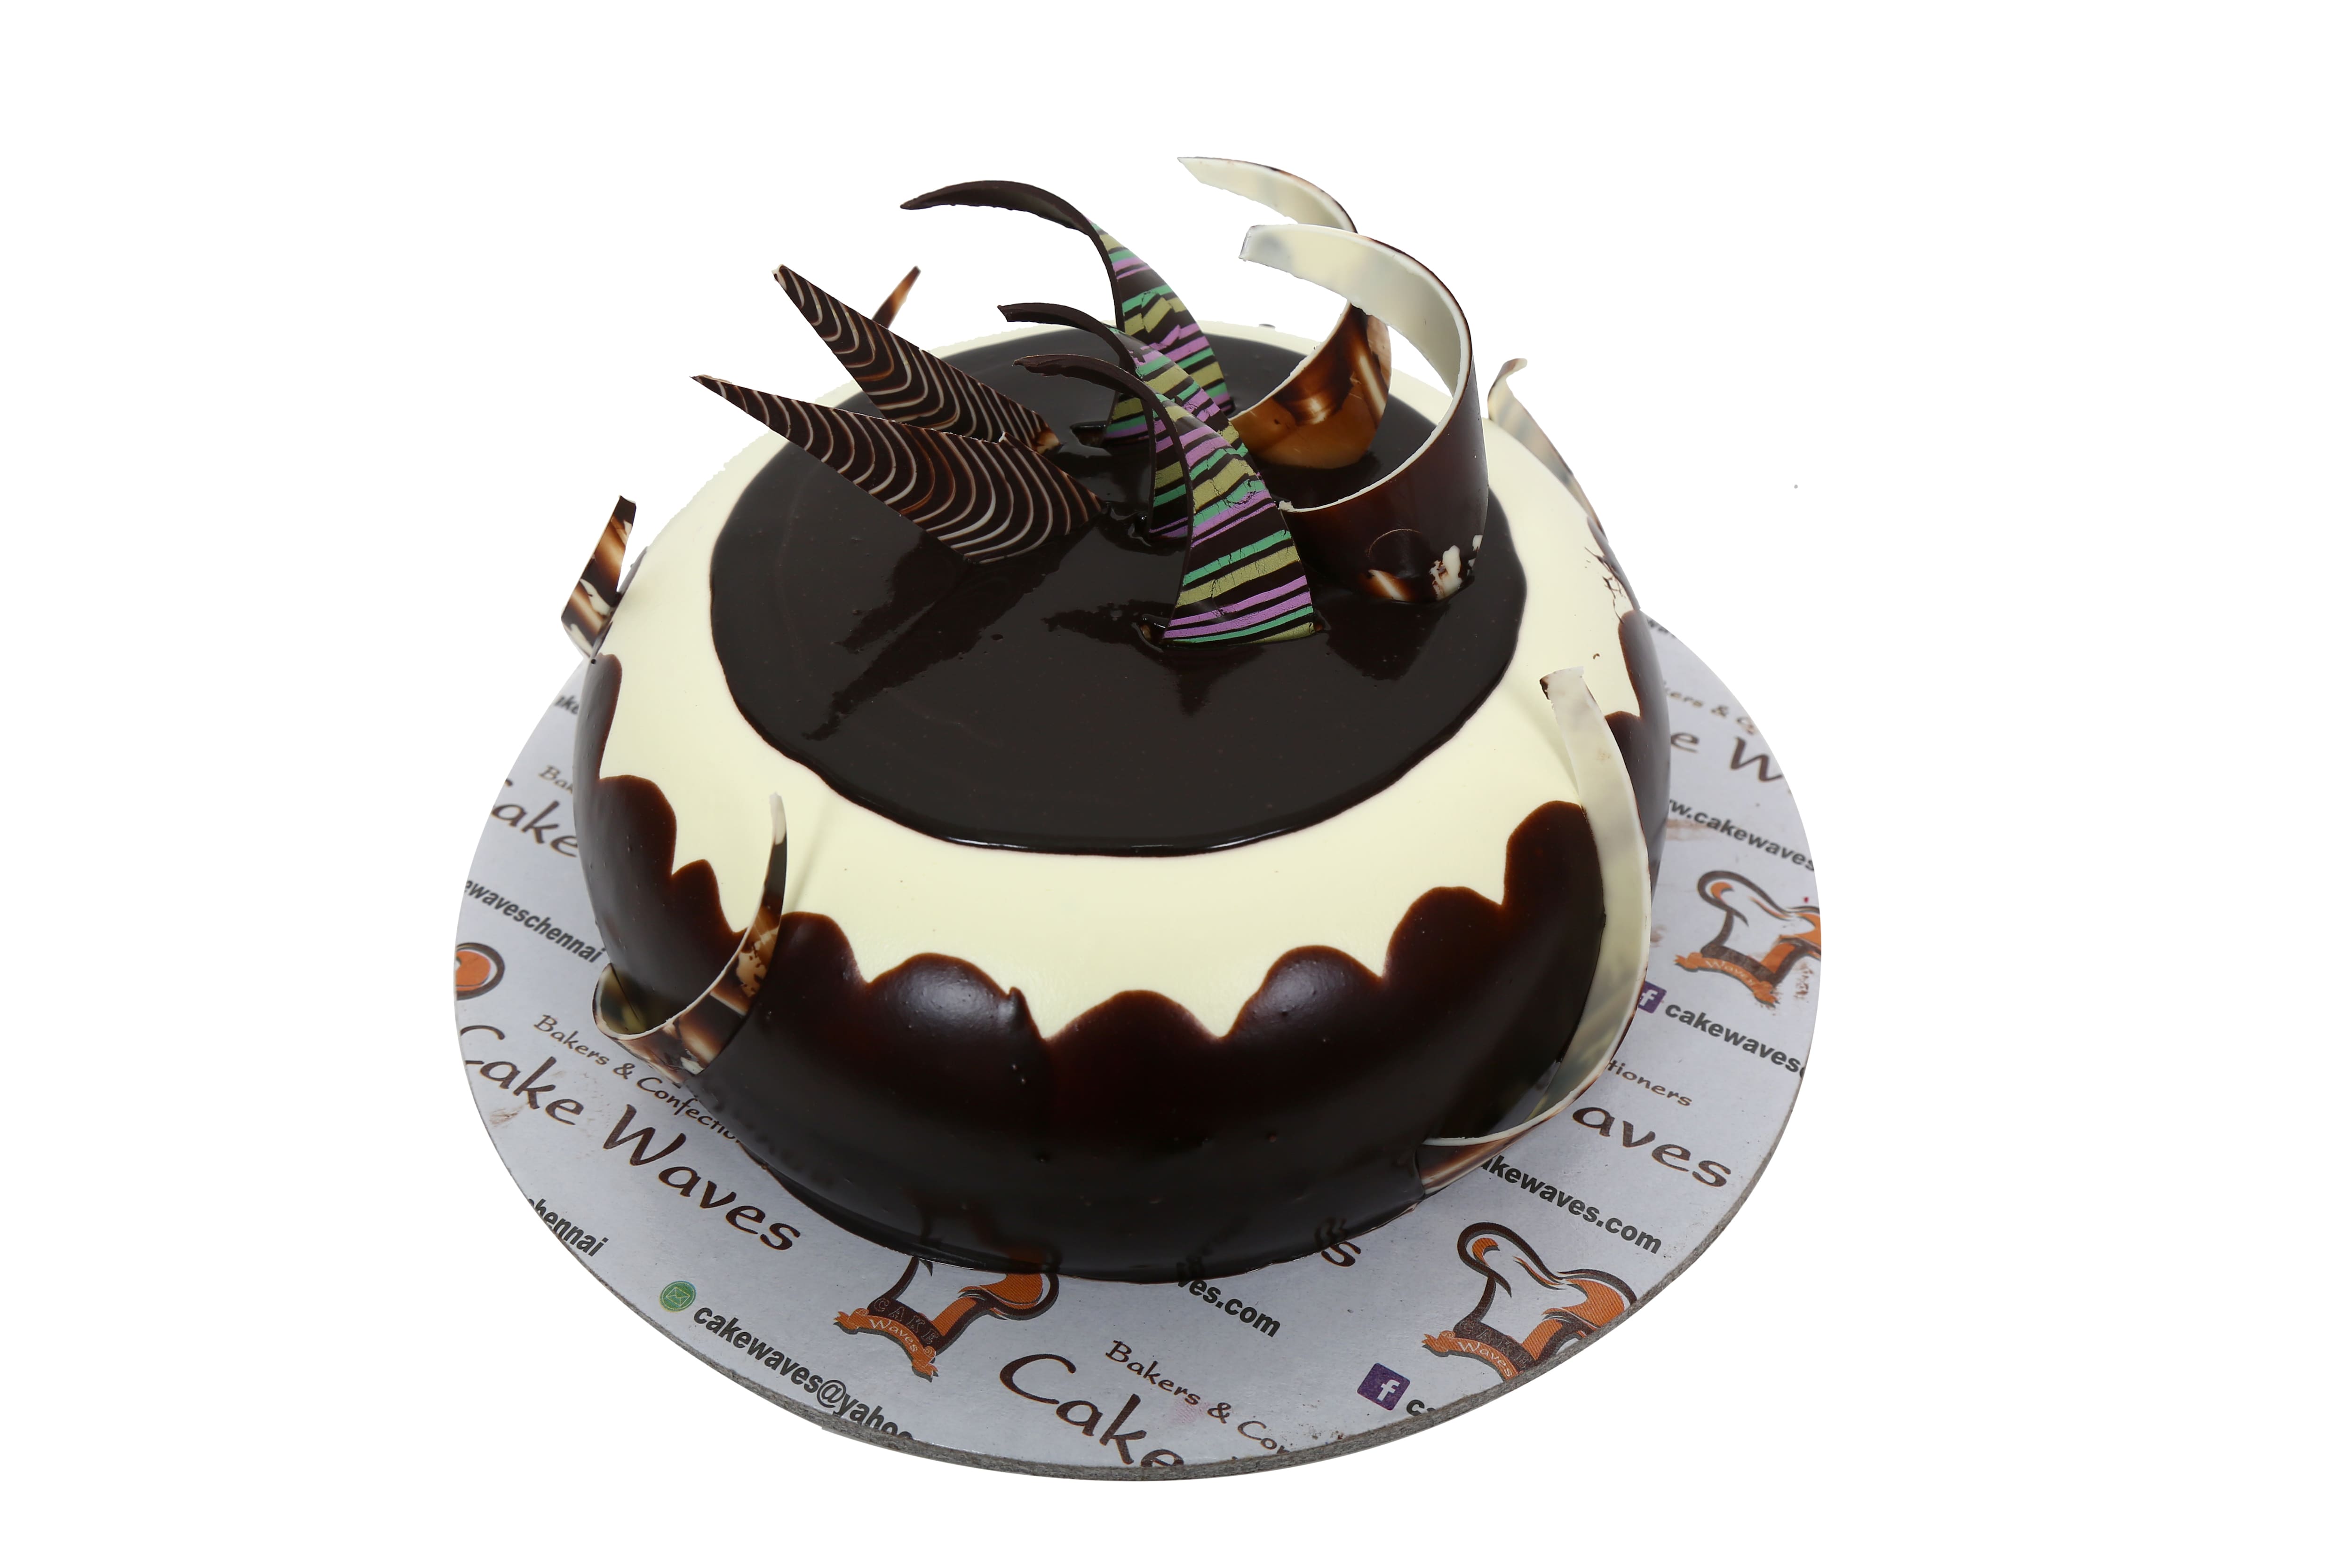 Details more than 60 waves truffle cake latest